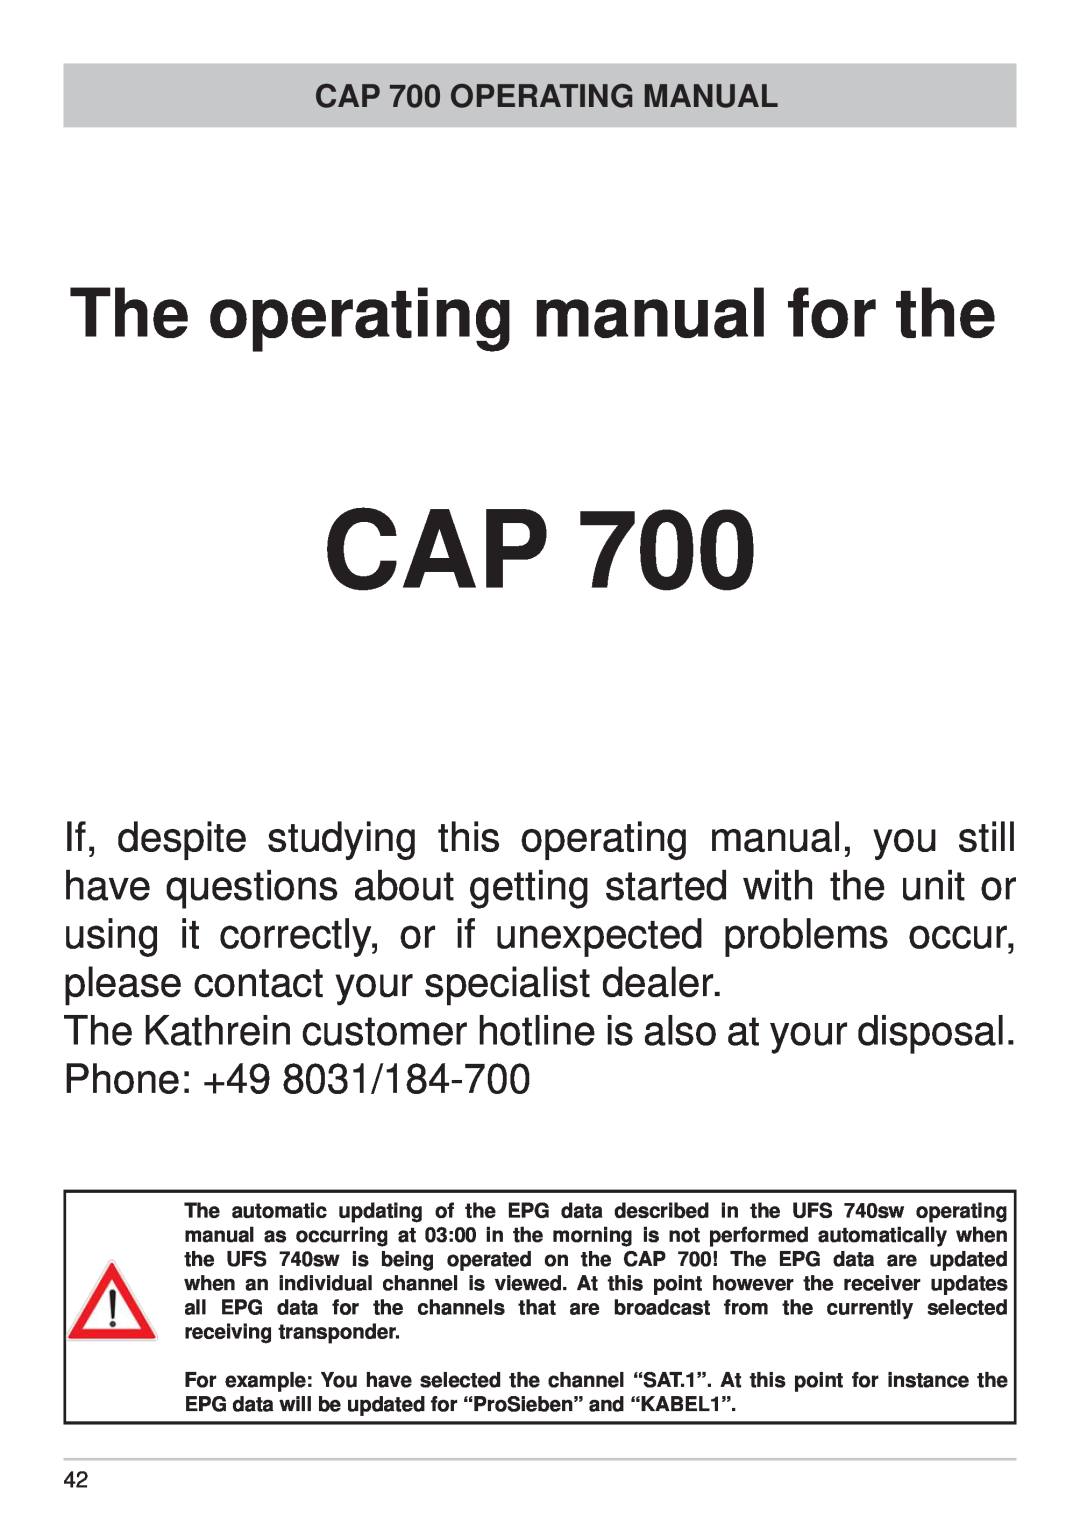 Kathrein The operating manual for the, CAP 700 OPERATING MANUAL 